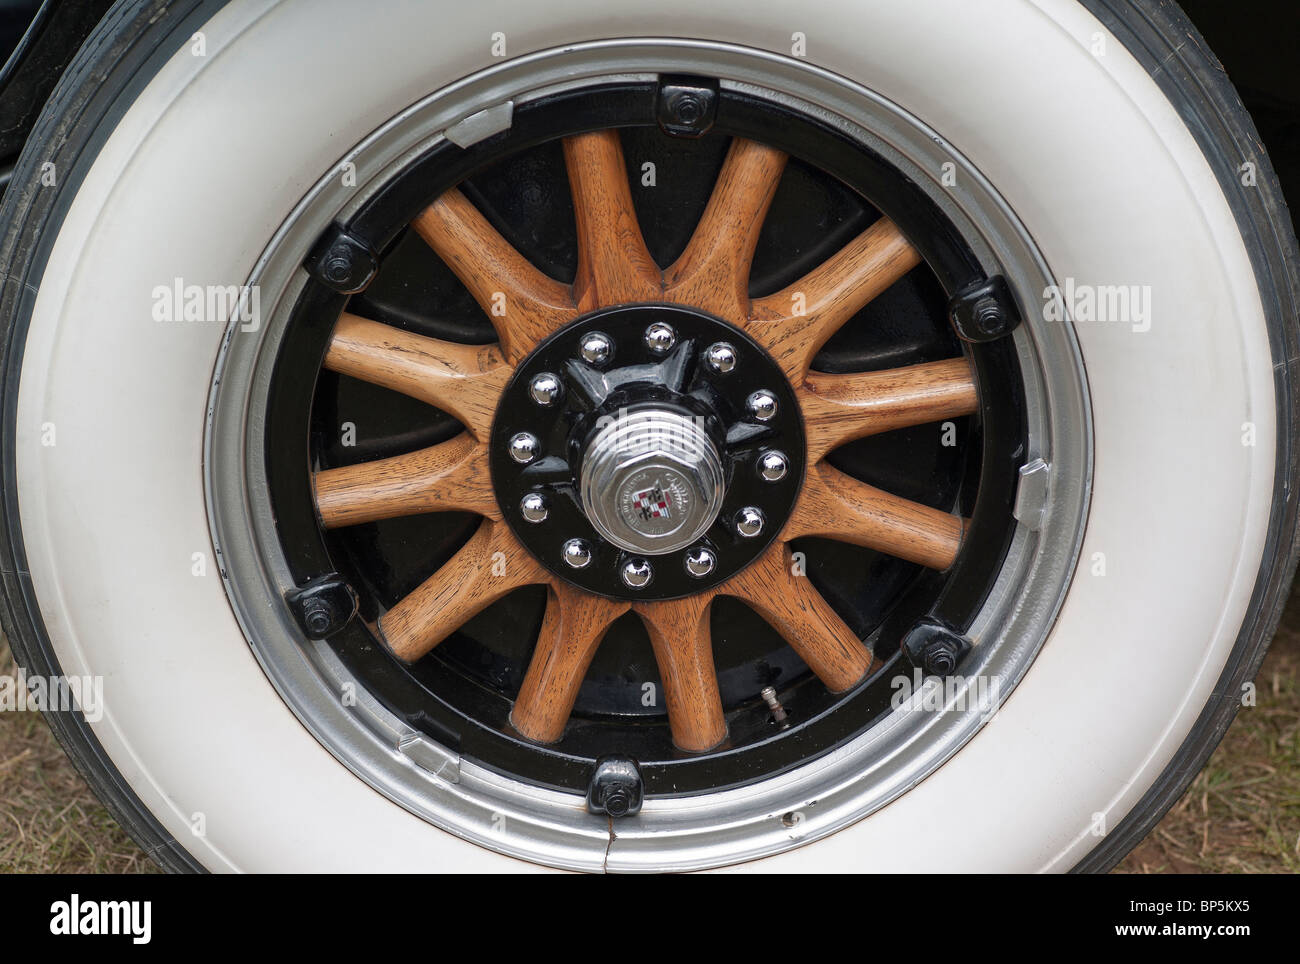 Wooden spoked automobile wheel with whitewall tyres in UK Stock Photo